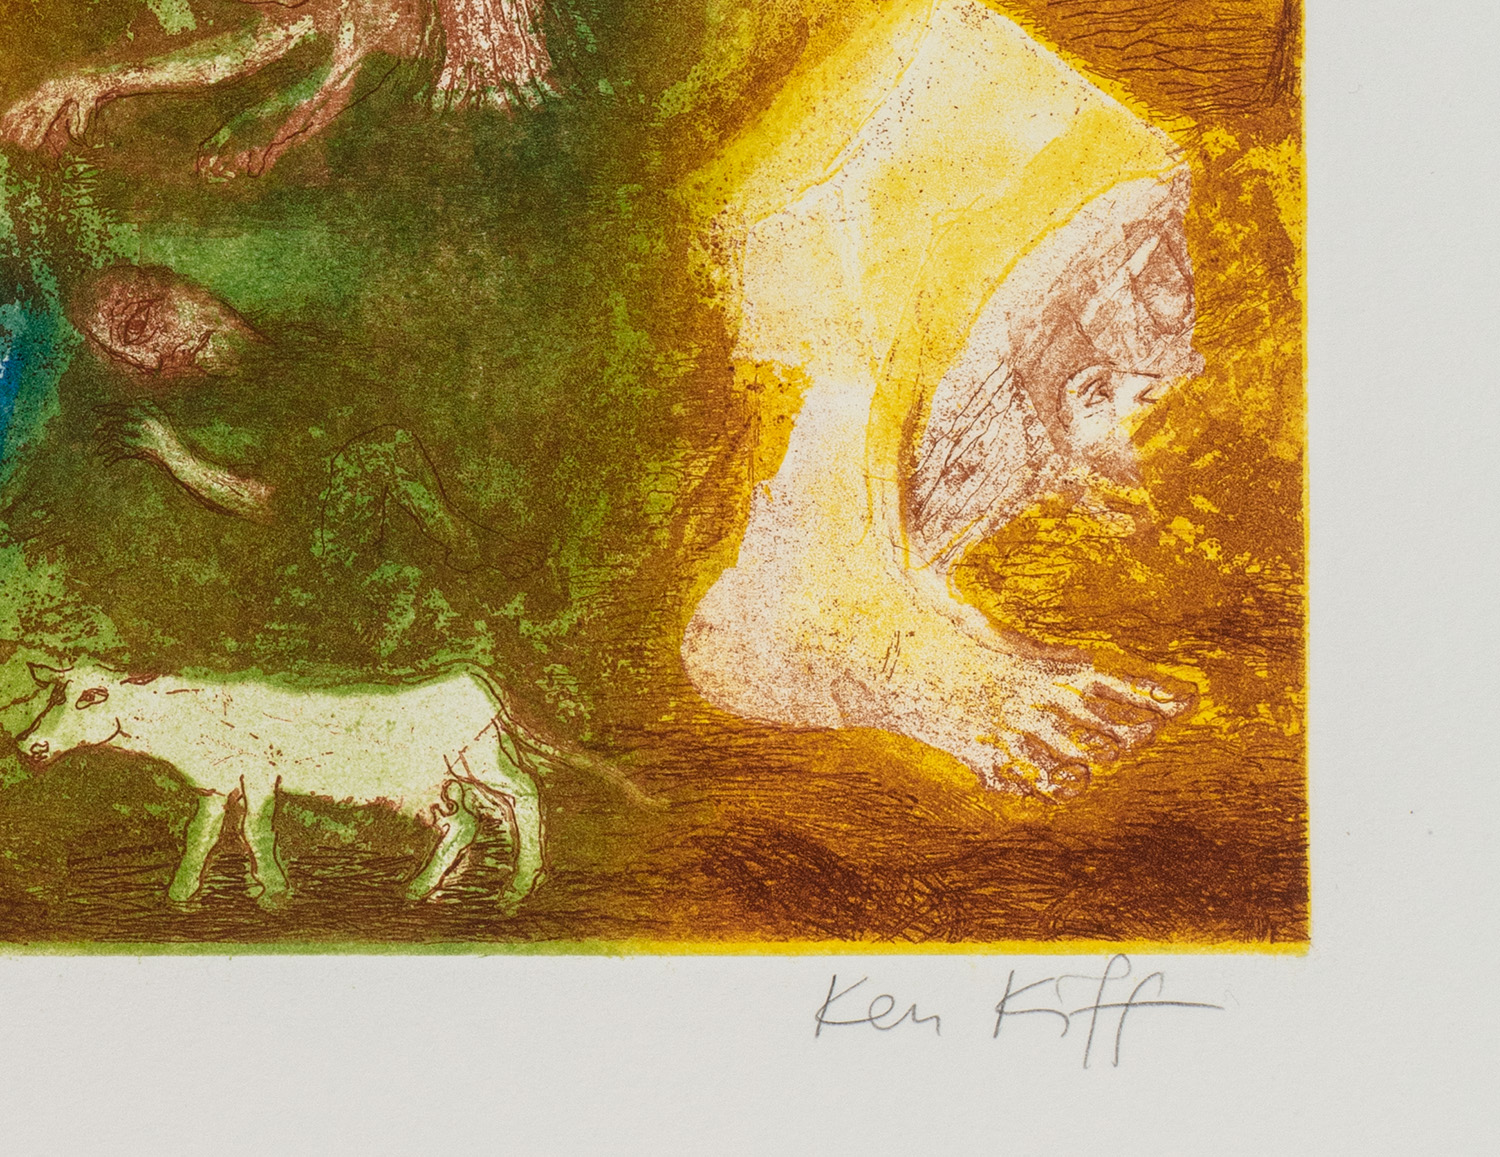 Ken Kiff, The Hill (1981)
Signed by the artist